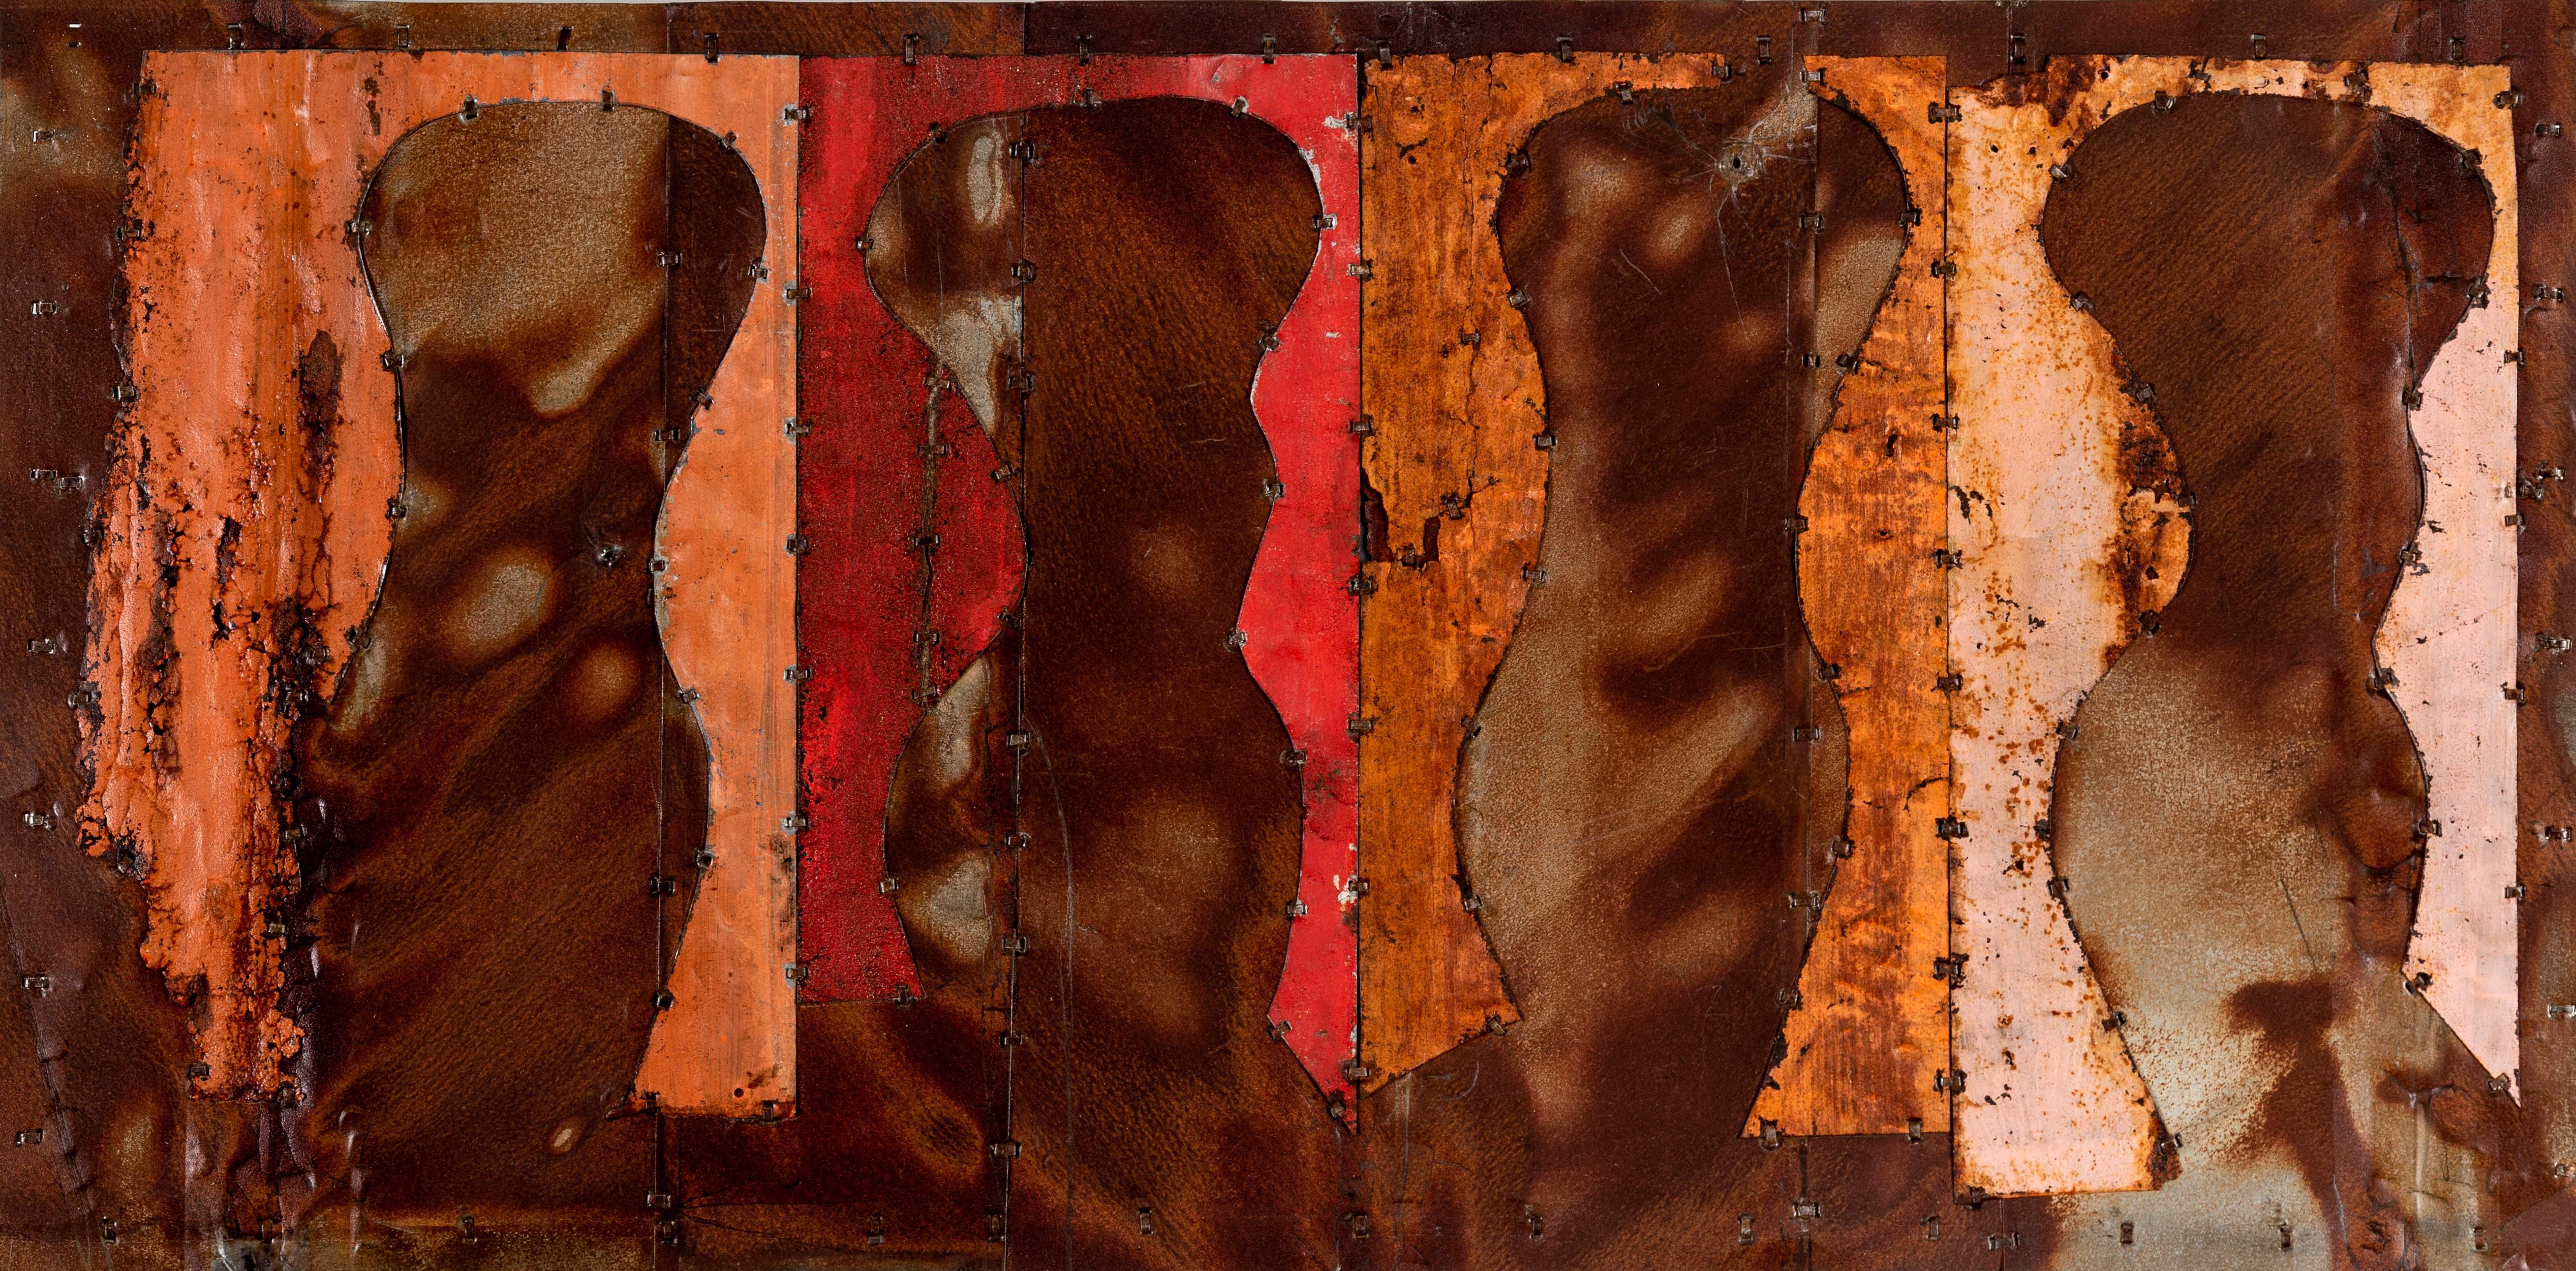 Large Abstract Metal Composition "Four Torsos: Study 4"